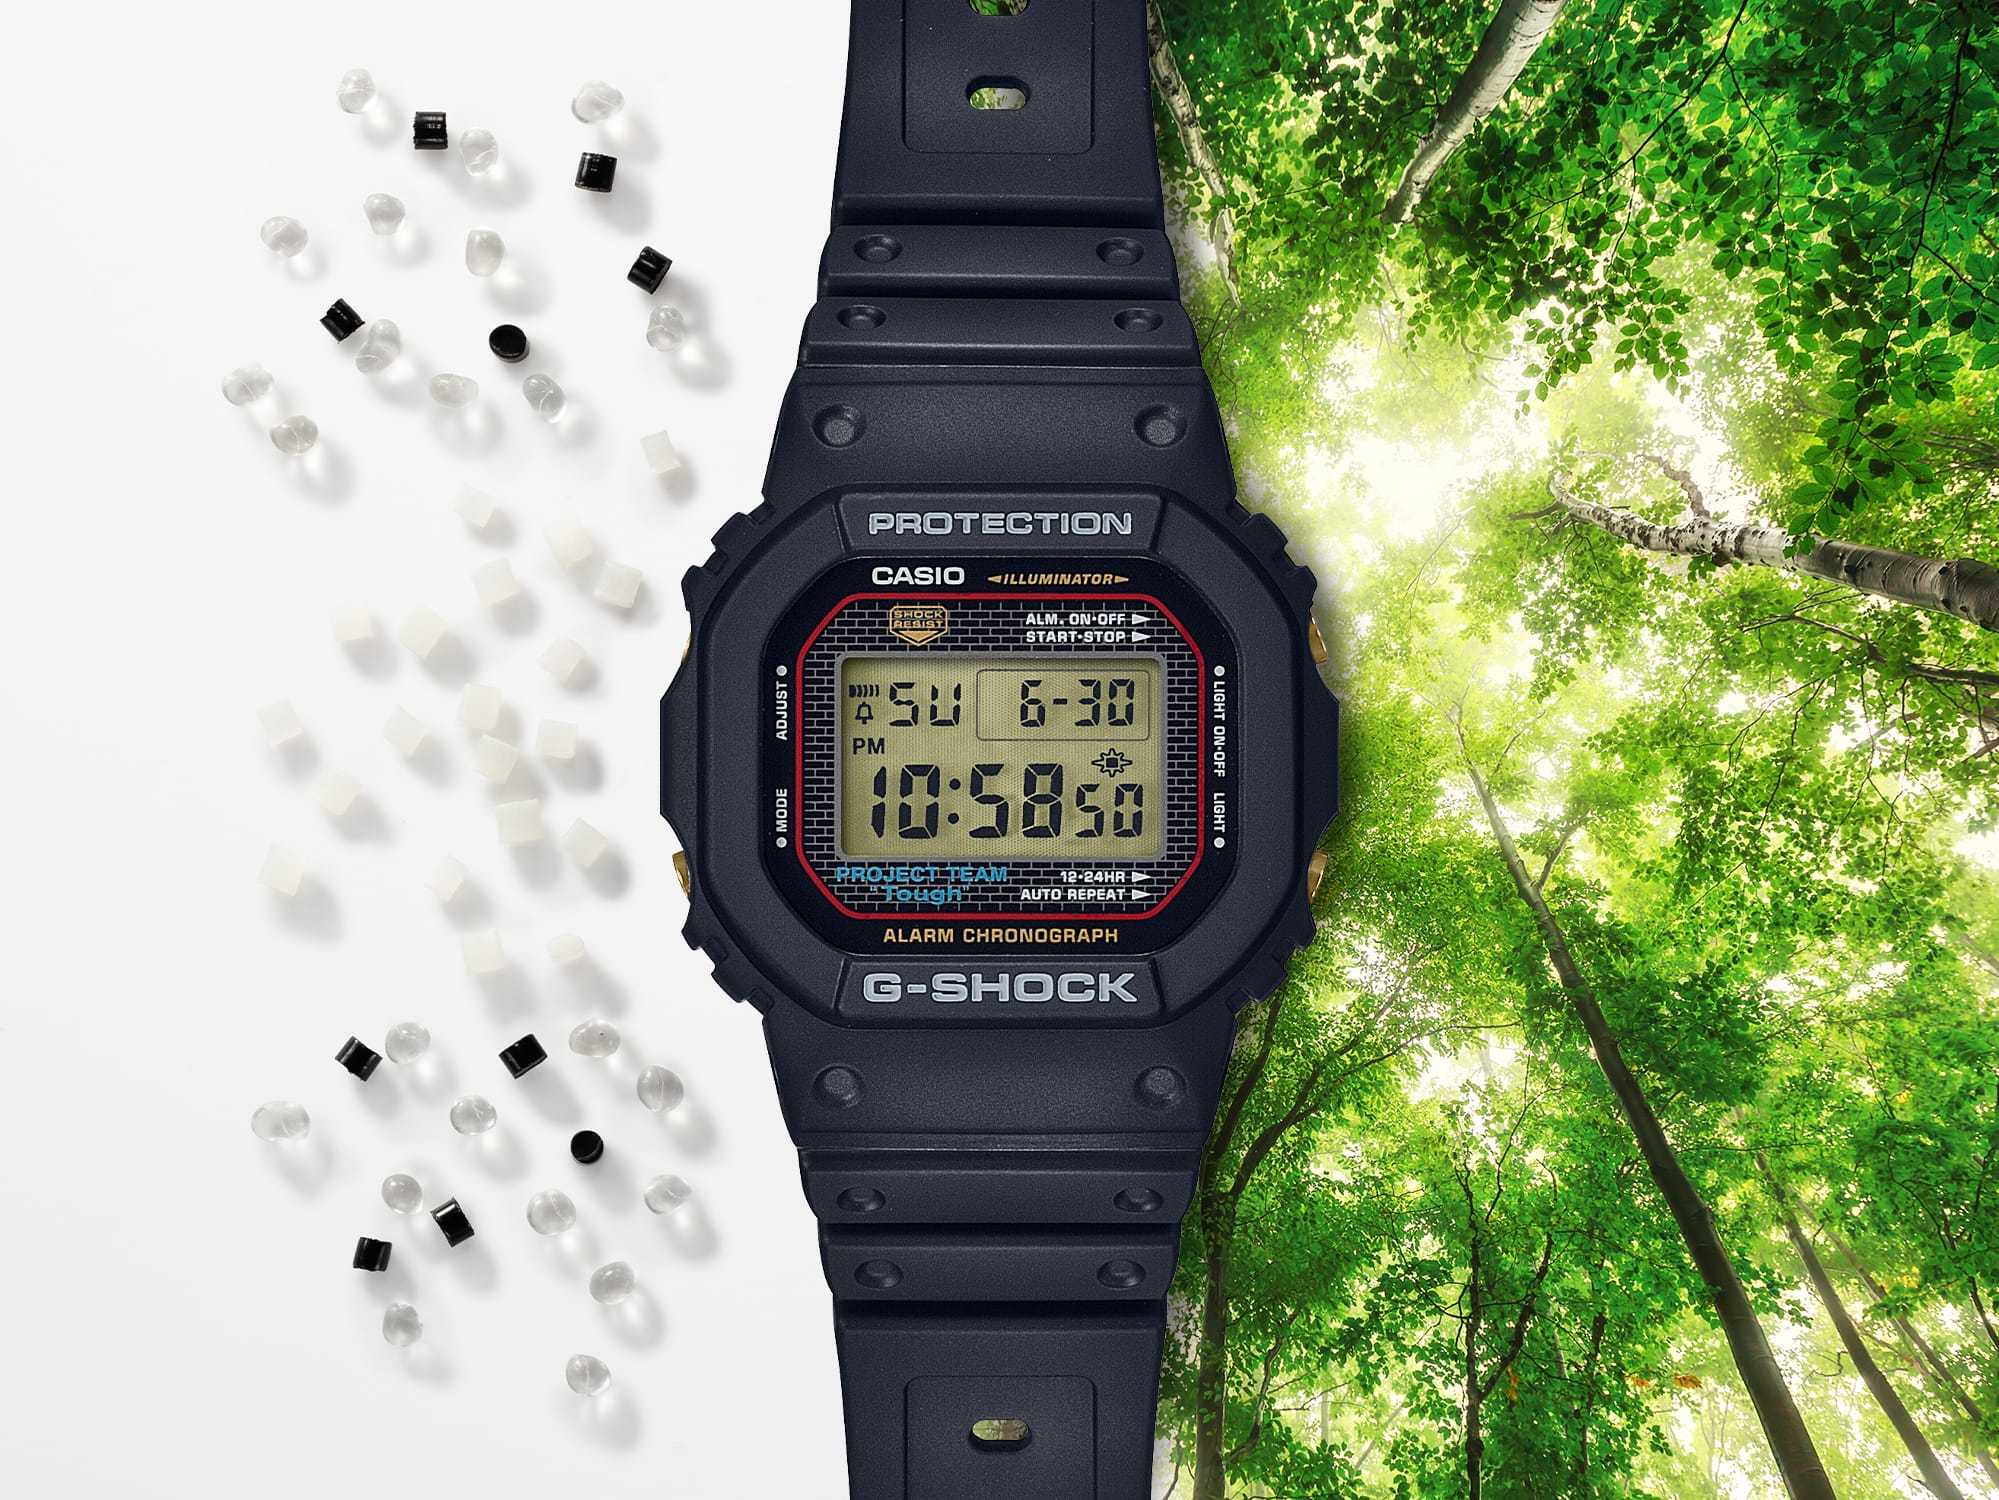 Digital G-Shock watch with Bio-mass beads and tree in the background